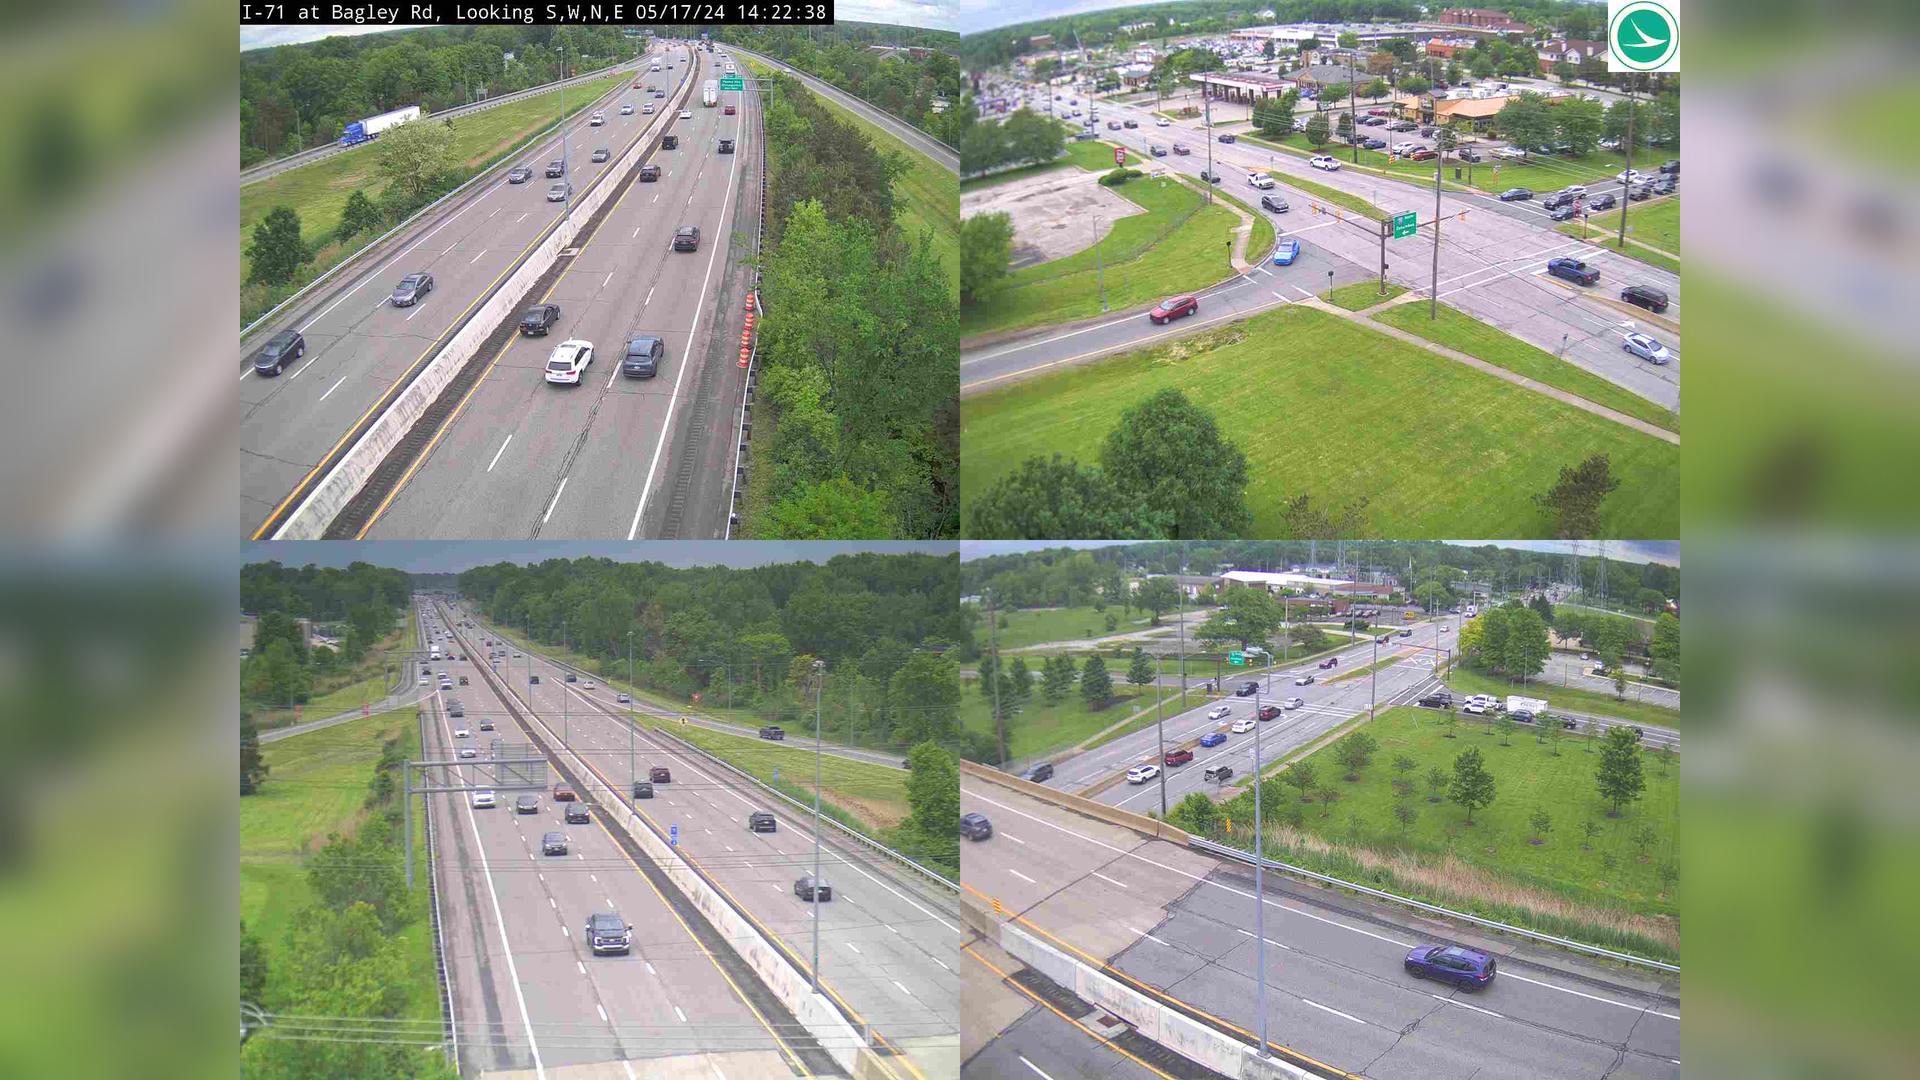 Traffic Cam Middleburg Heights: I-71 at Bagley Rd